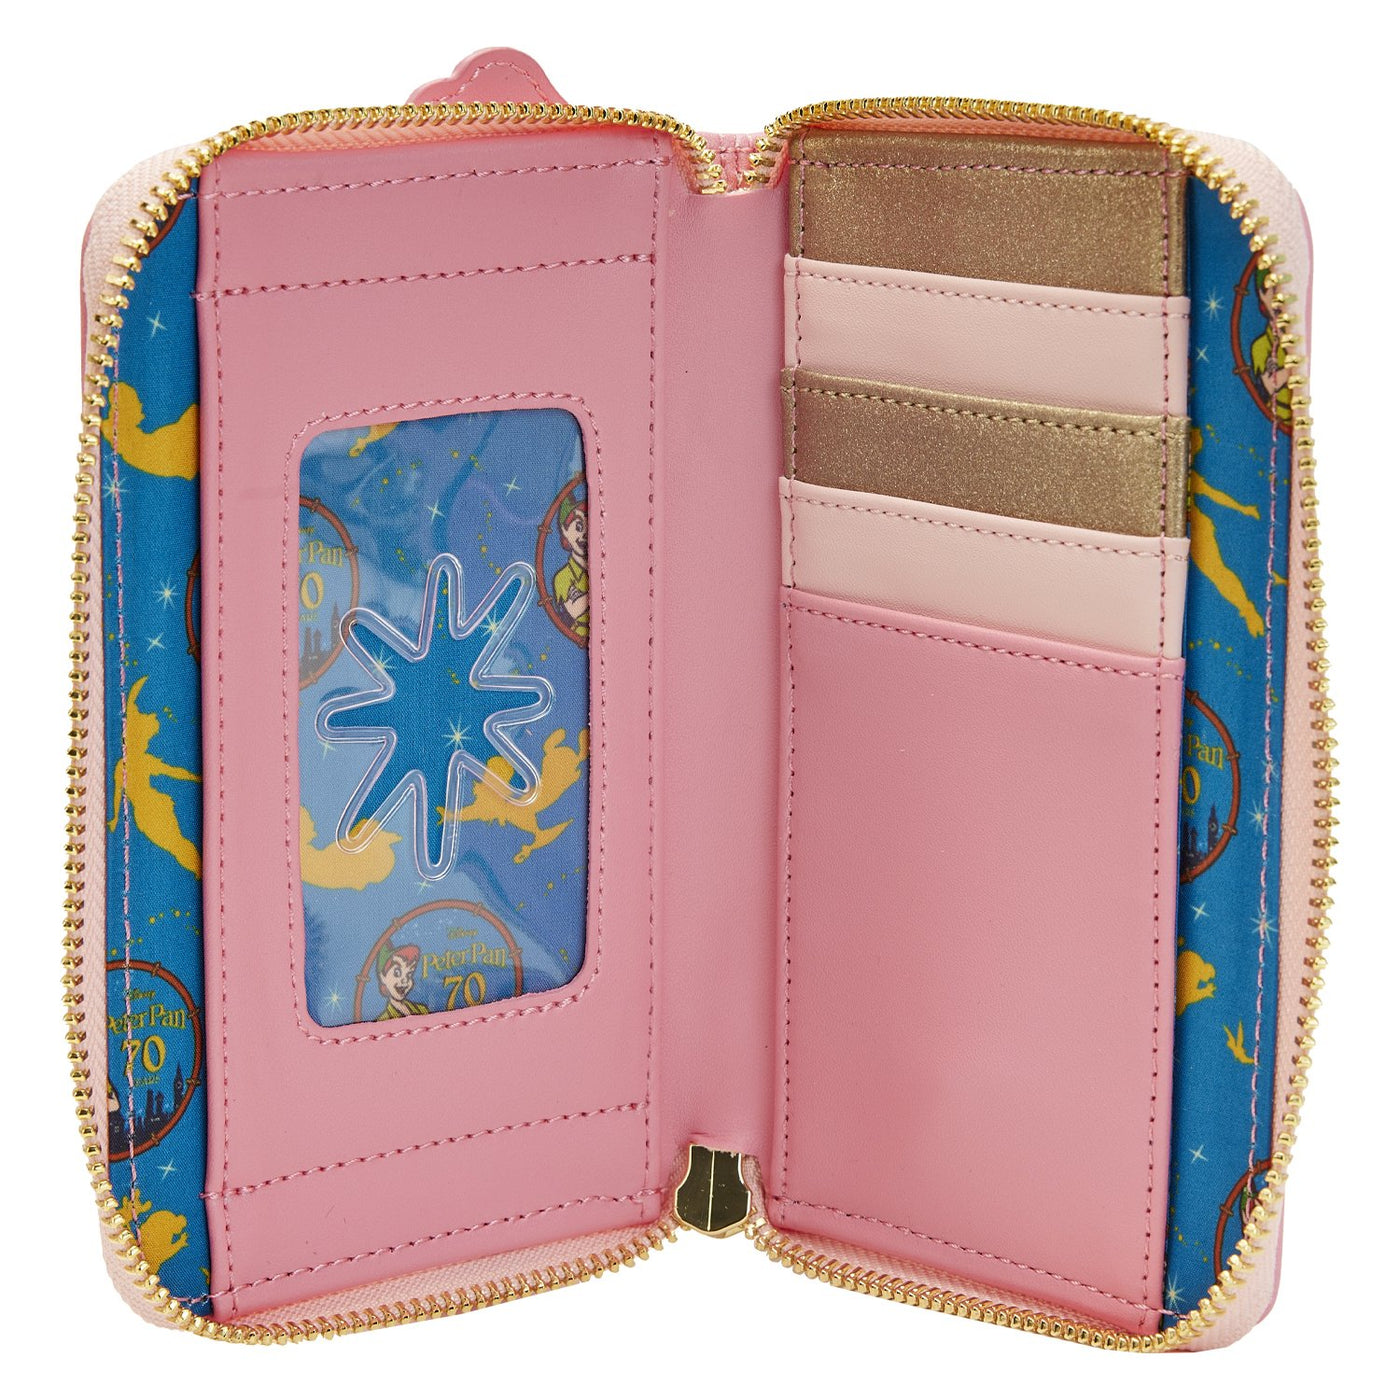 671803447356 - Loungefly Disney Peter Pan You Can Fly 70th Anniversary Zip-Around Wallet - Interior